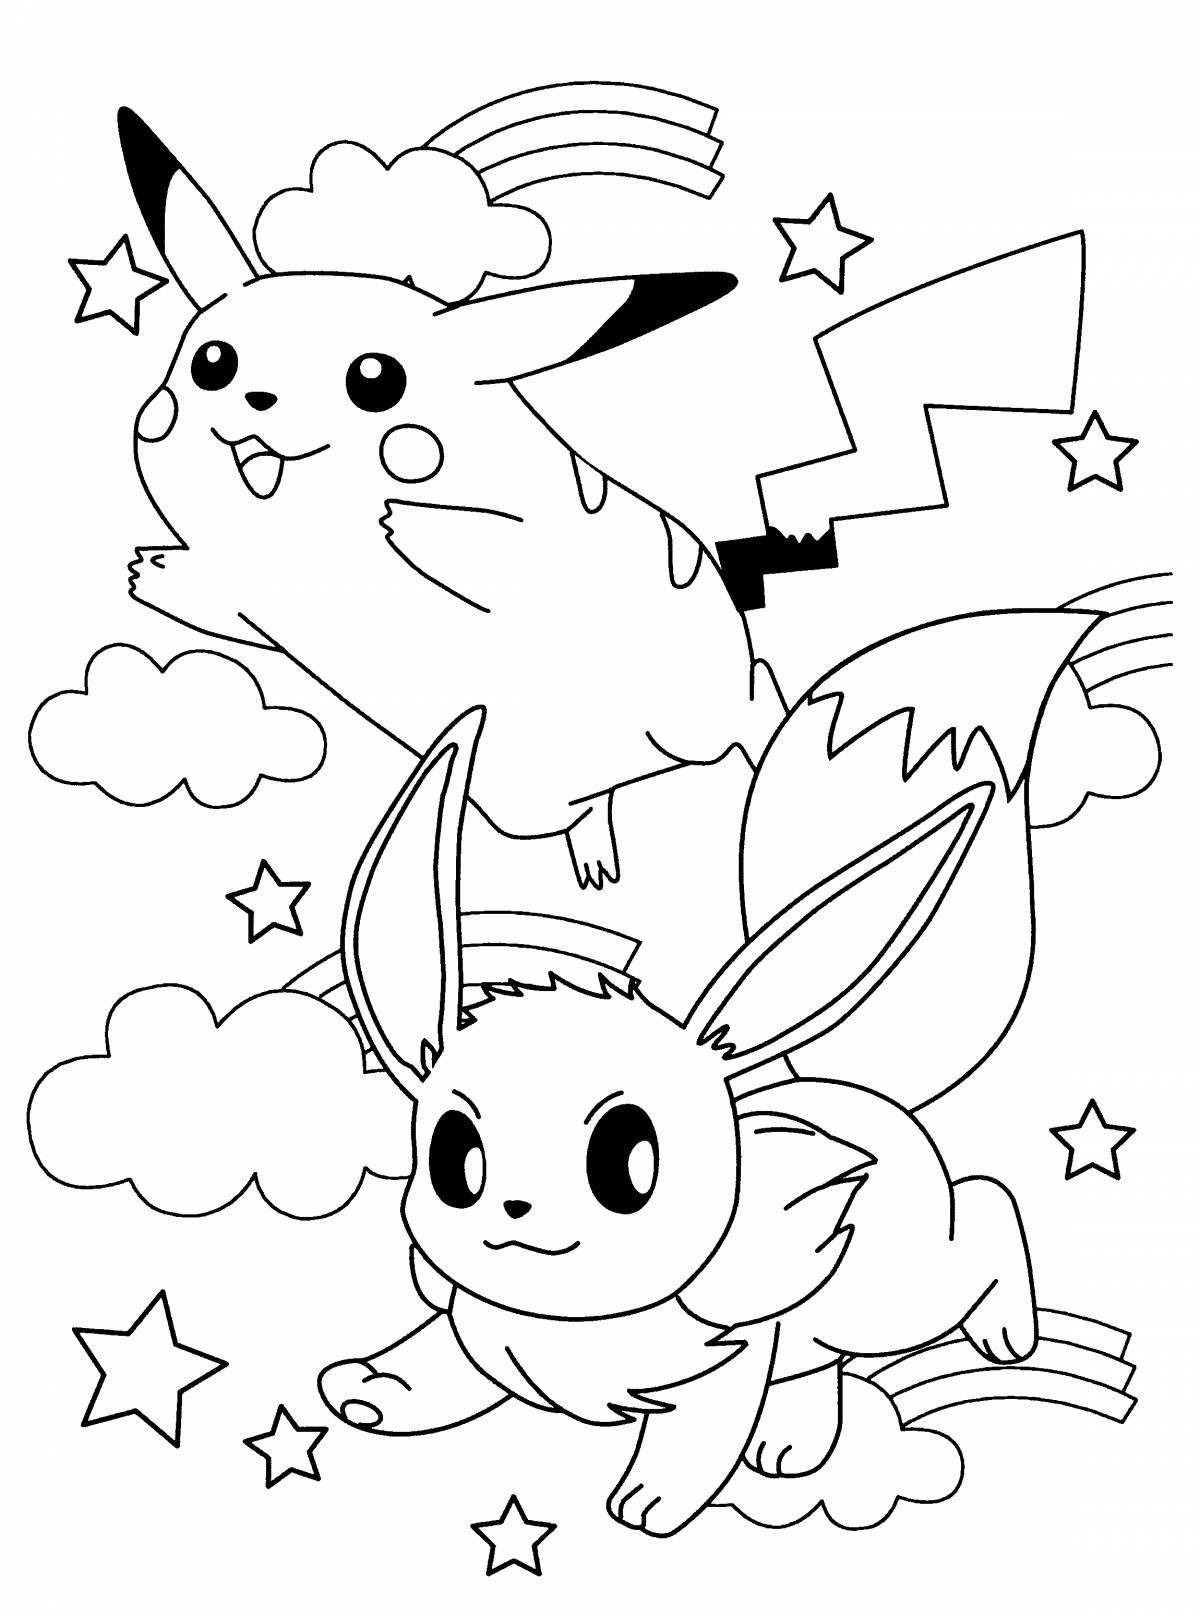 Colorful pikachu coloring book for girls